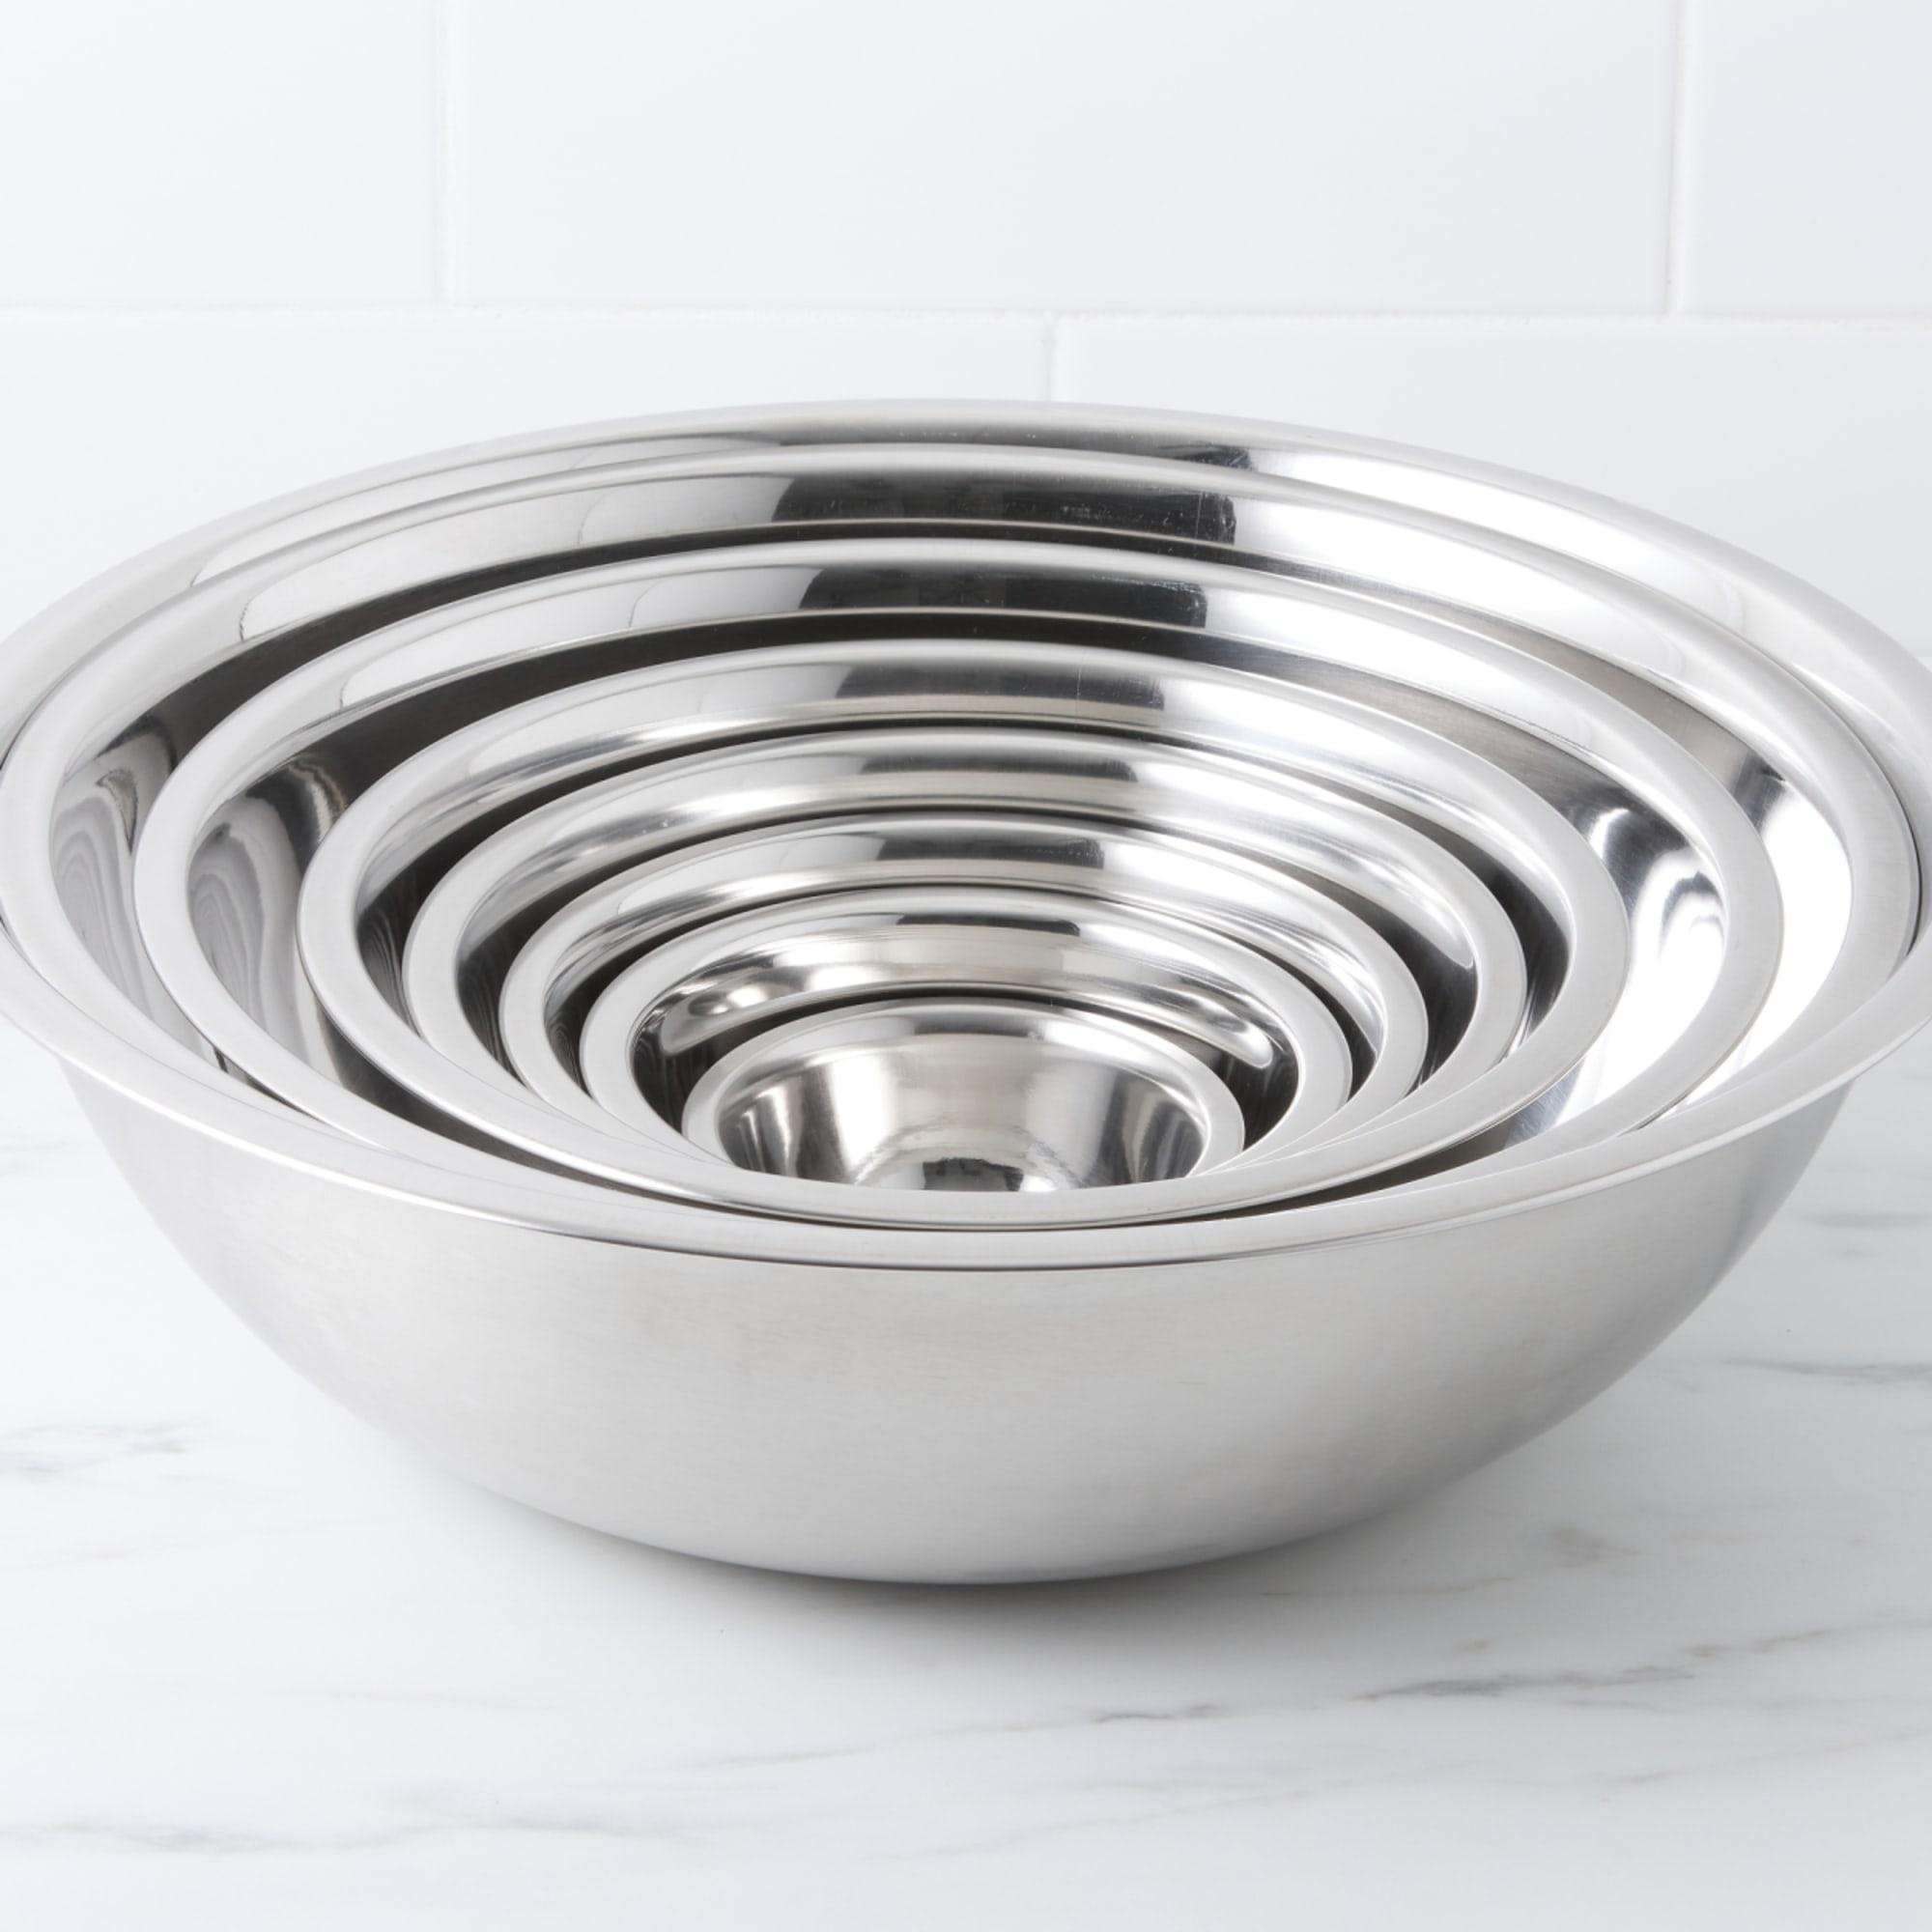 Kitchen Pro Mixwell Stainless Steel Mixing Bowl 12cm - 250ml Image 5